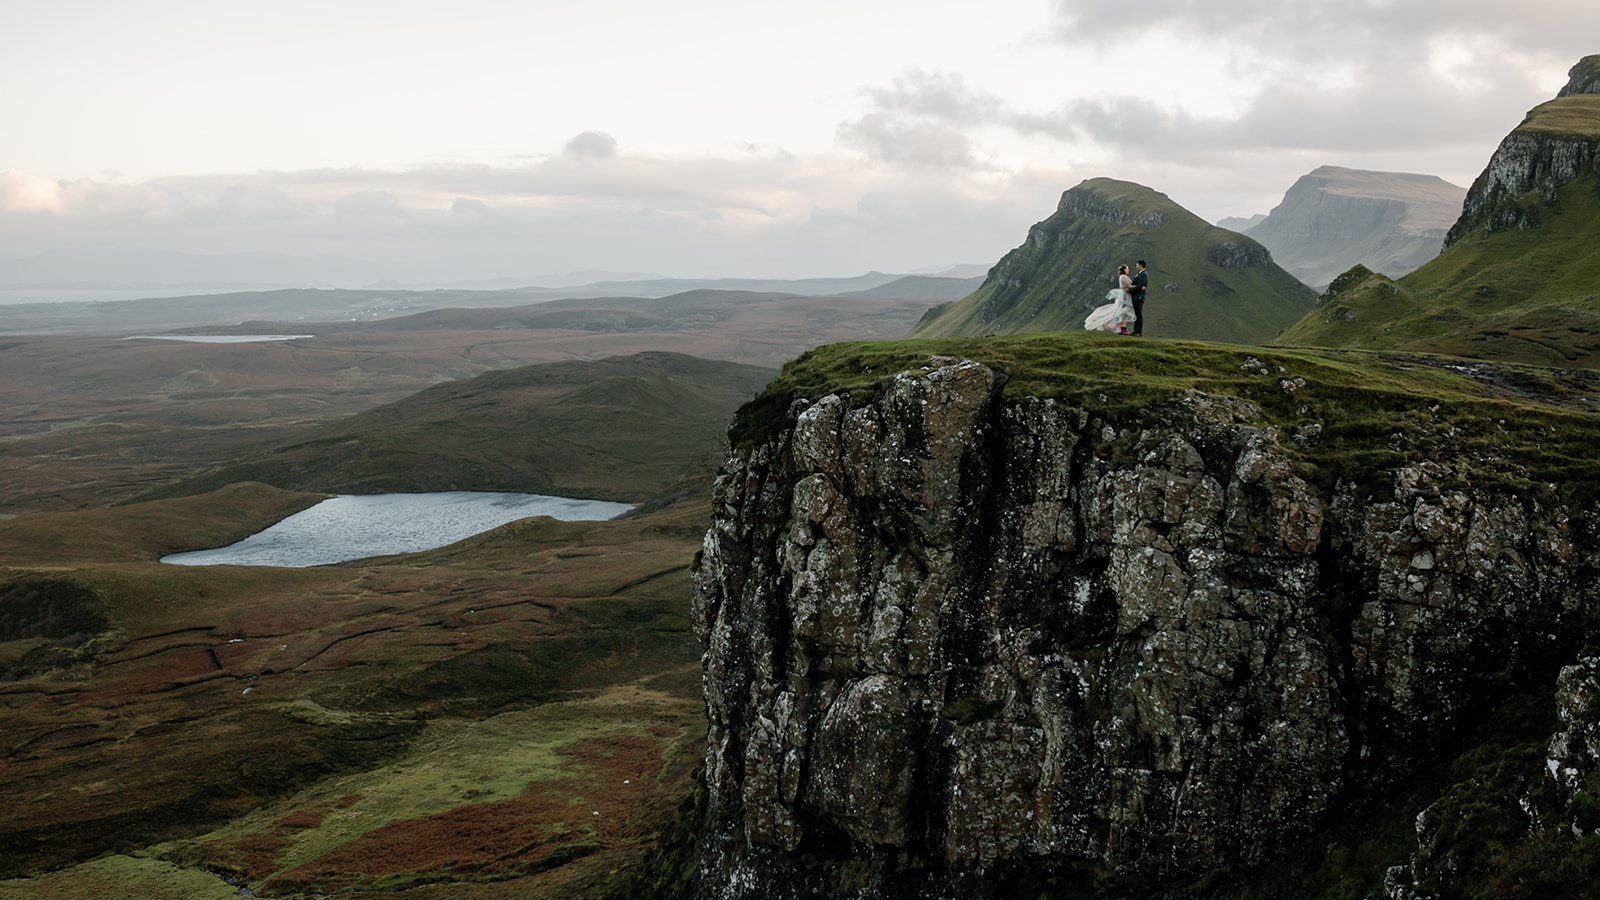 Mellie and Andrew stand at the edge of a rocky cliff overlooking the breathtaking Quiraing landscape on the Isle of Skye